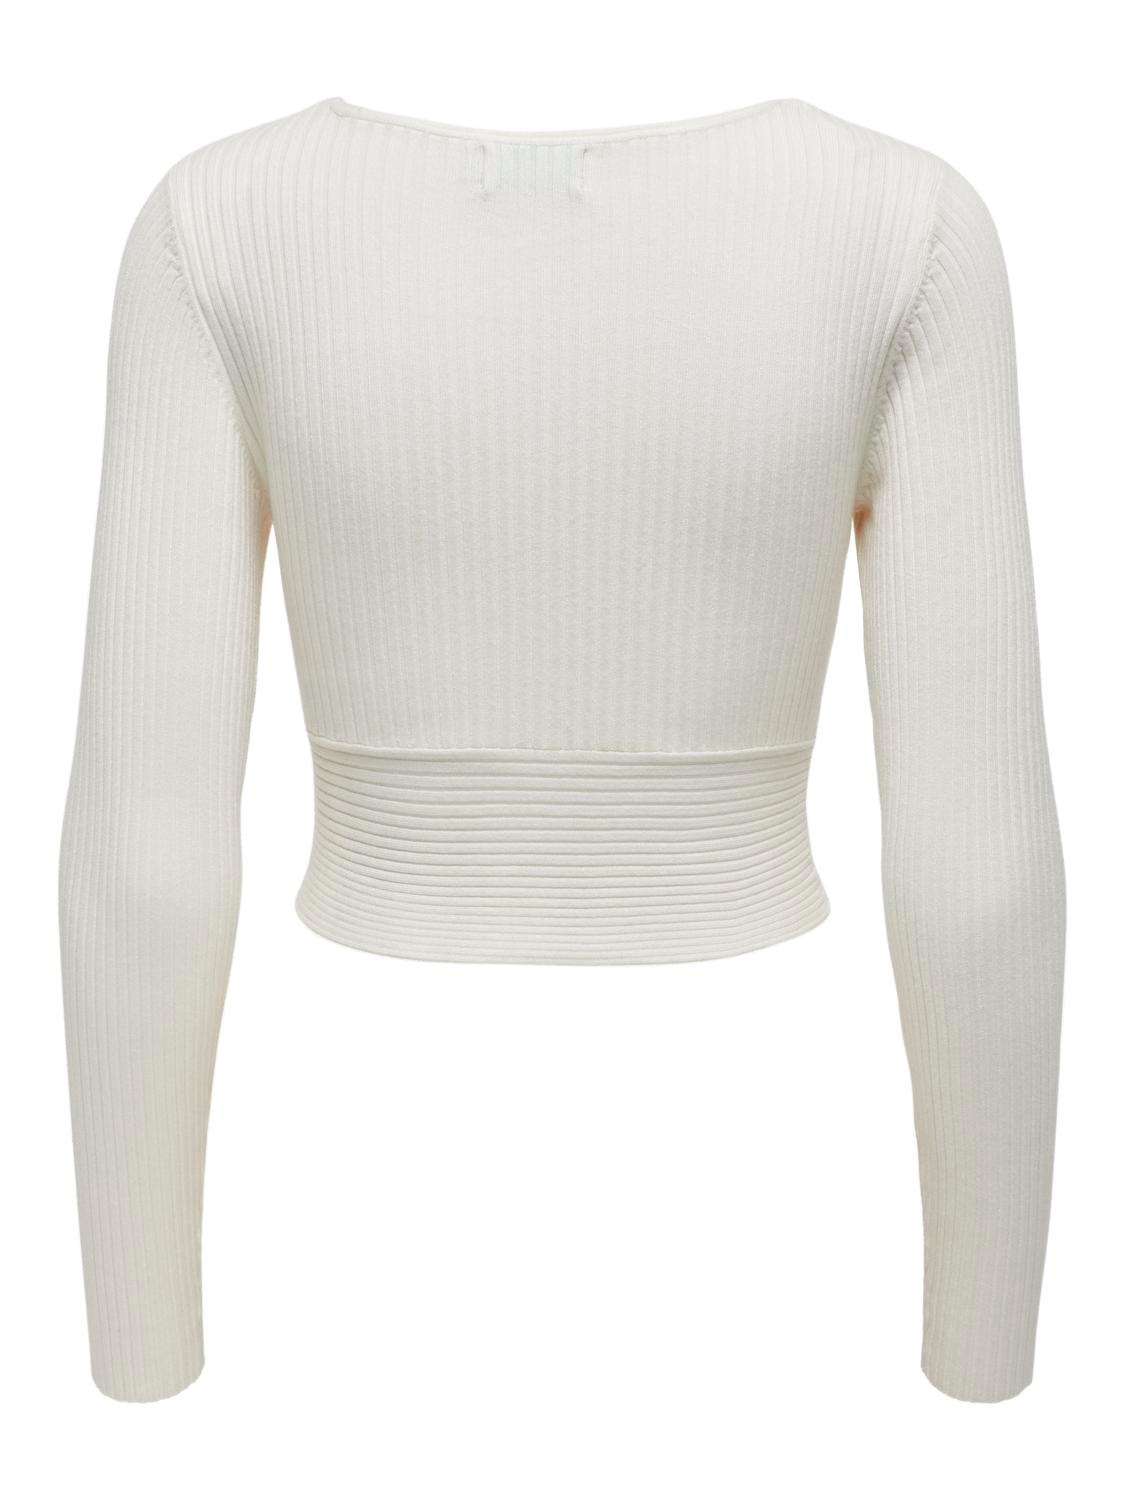 ONLY Cropped Fit V-ringning Pullover -Bright White - 15310652